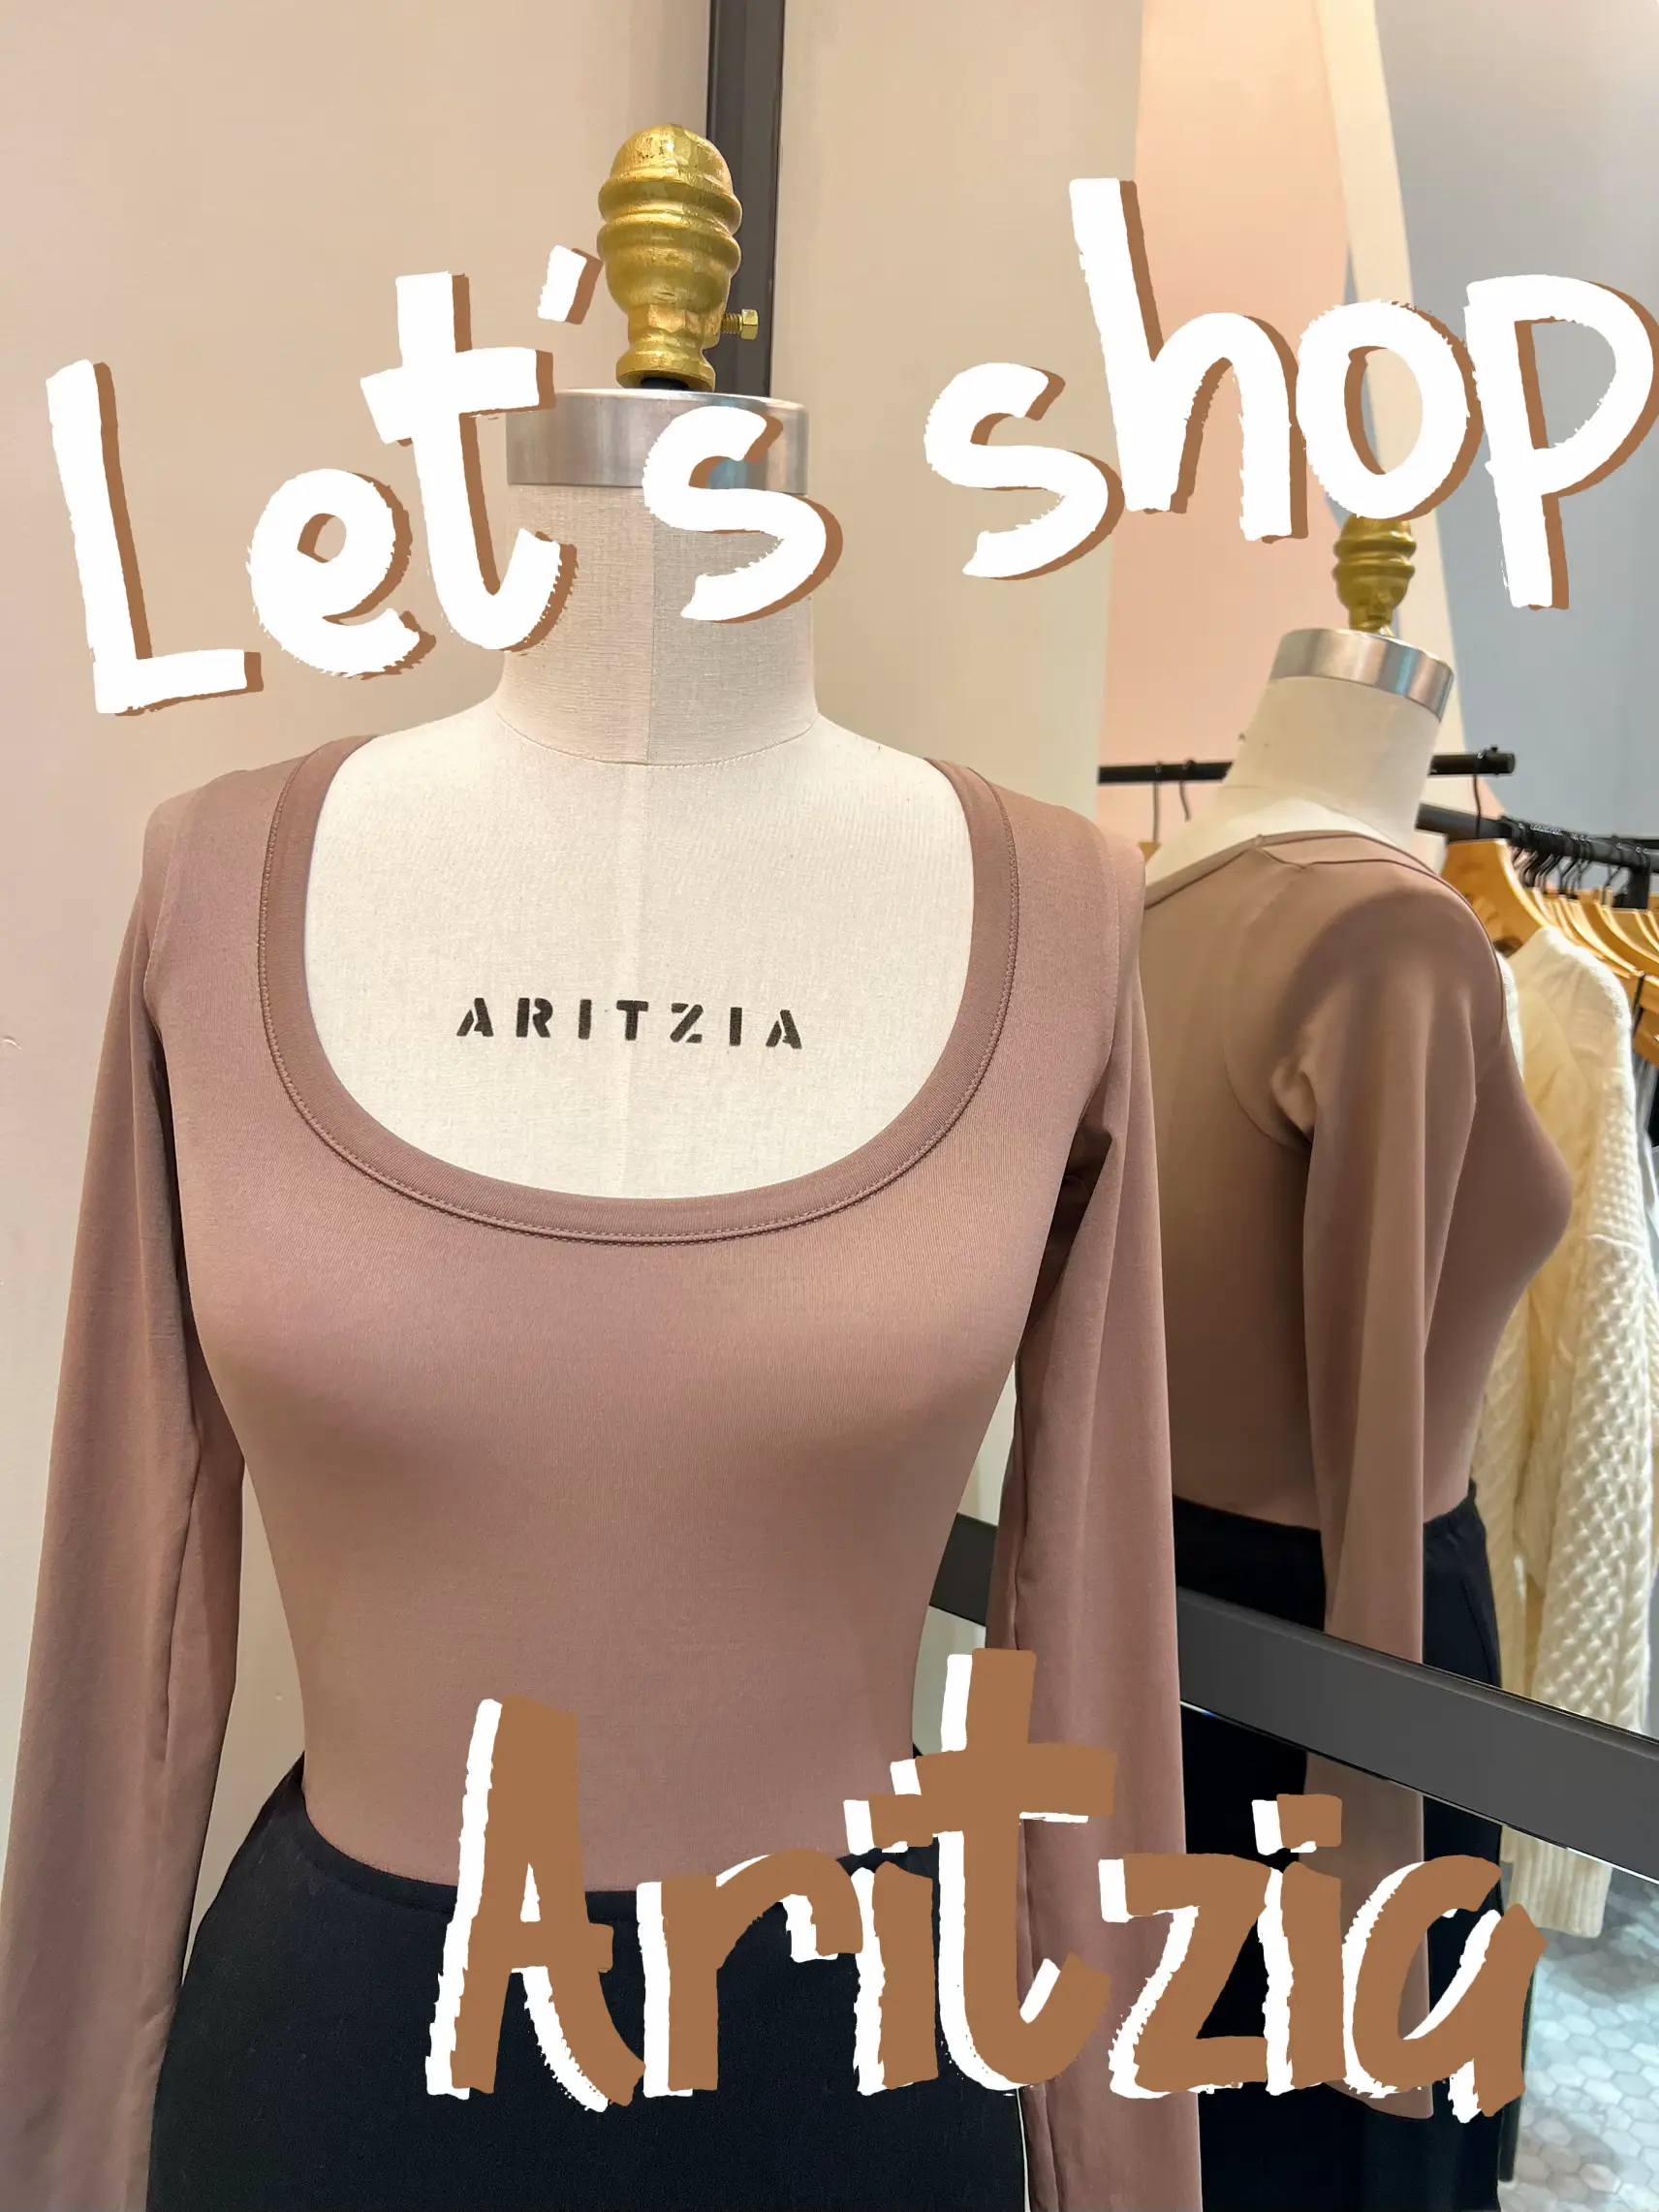 shop with me @ aritzia (ft. TNA)🛒, Gallery posted by lex